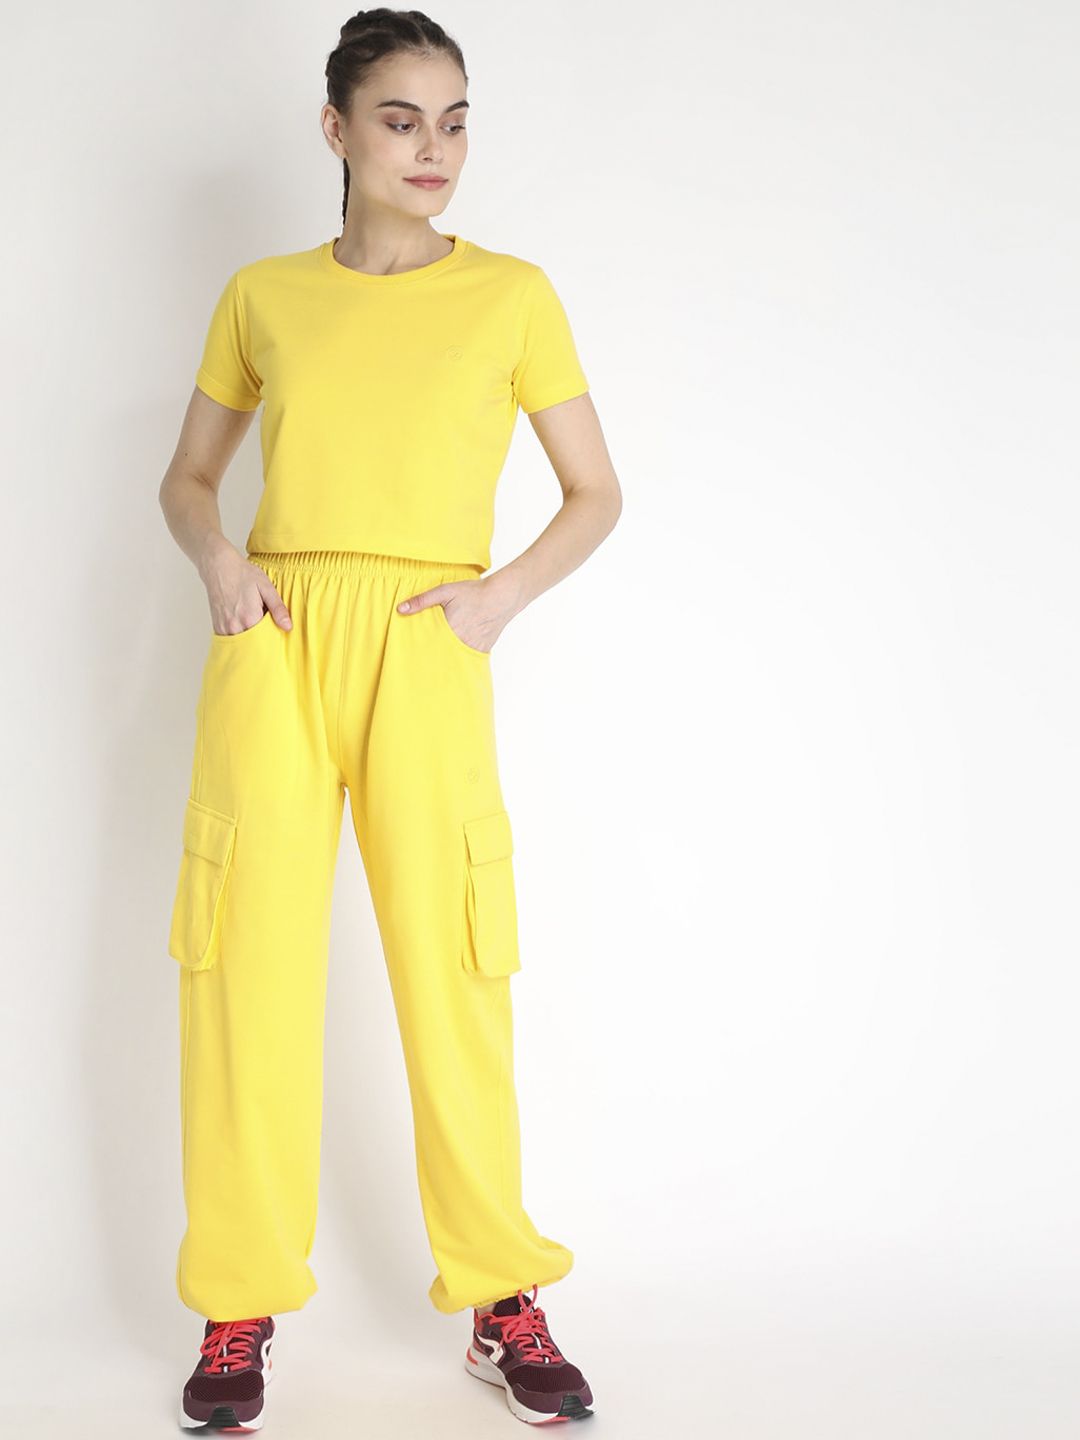 Chkokko Women Yellow Solid Regular Fit Tracksuit Price in India